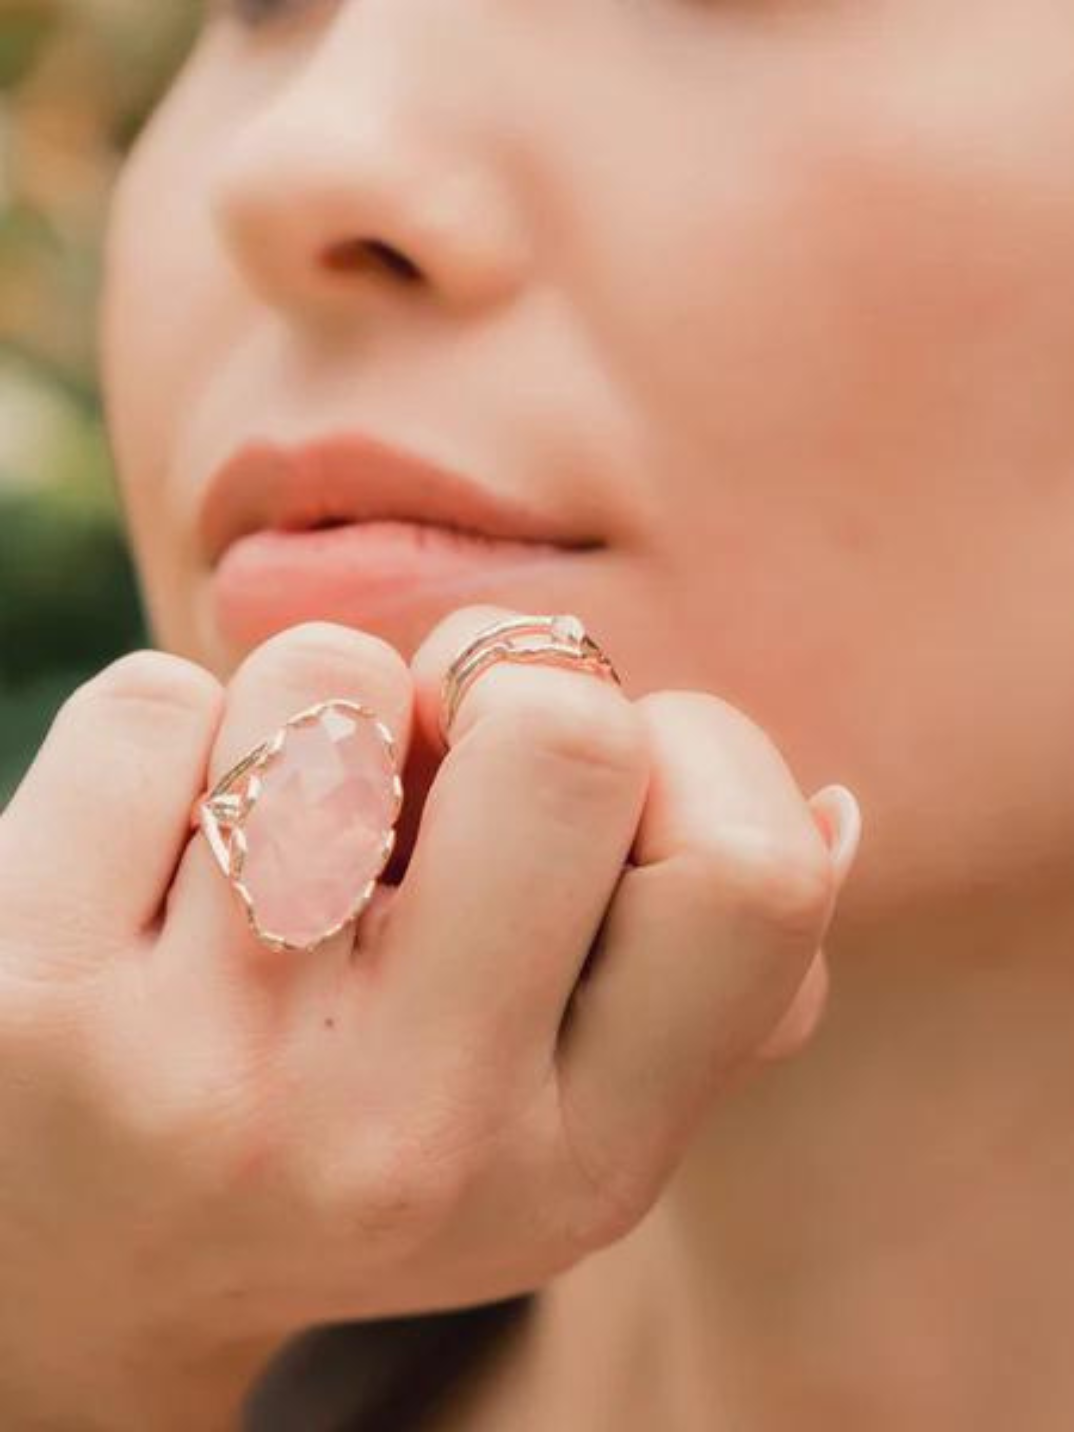 Our India Affair Rose Quartz Ring will add that feminine and stylish look to your outfit.  Details: A dusty pink semi precious stone that will not only make you feel beautiful on the outside, but on the inside too!